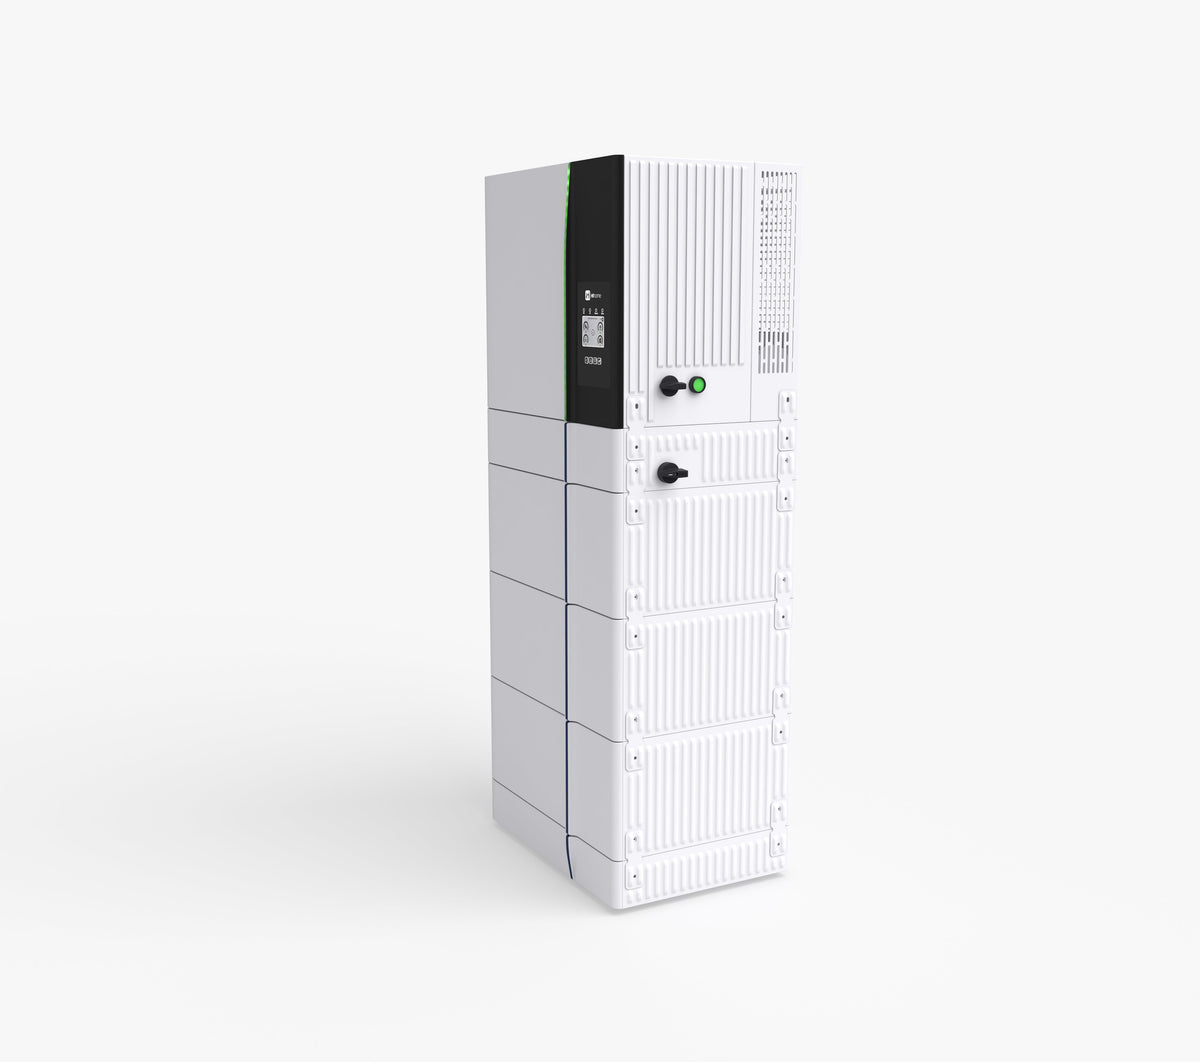 Hihome.Energy Power Station - 12.27 kWh - 12 kW Hybrid Inverter - All in One